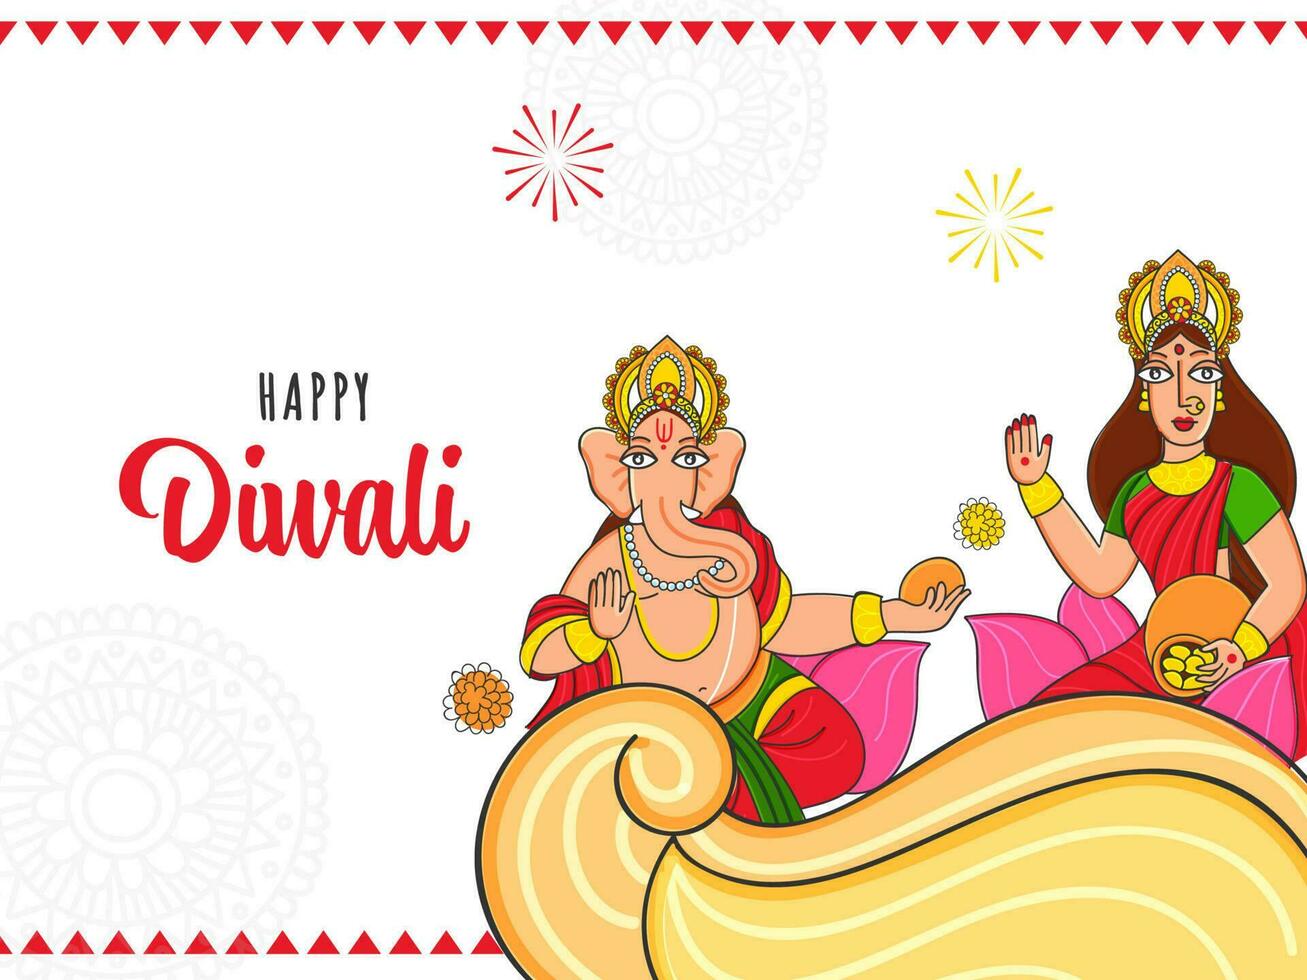 Happy Diwali Celebration Concept With Illustration Of Lord Ganesha And Goddess Lakshmi Character On White Baclground. vector